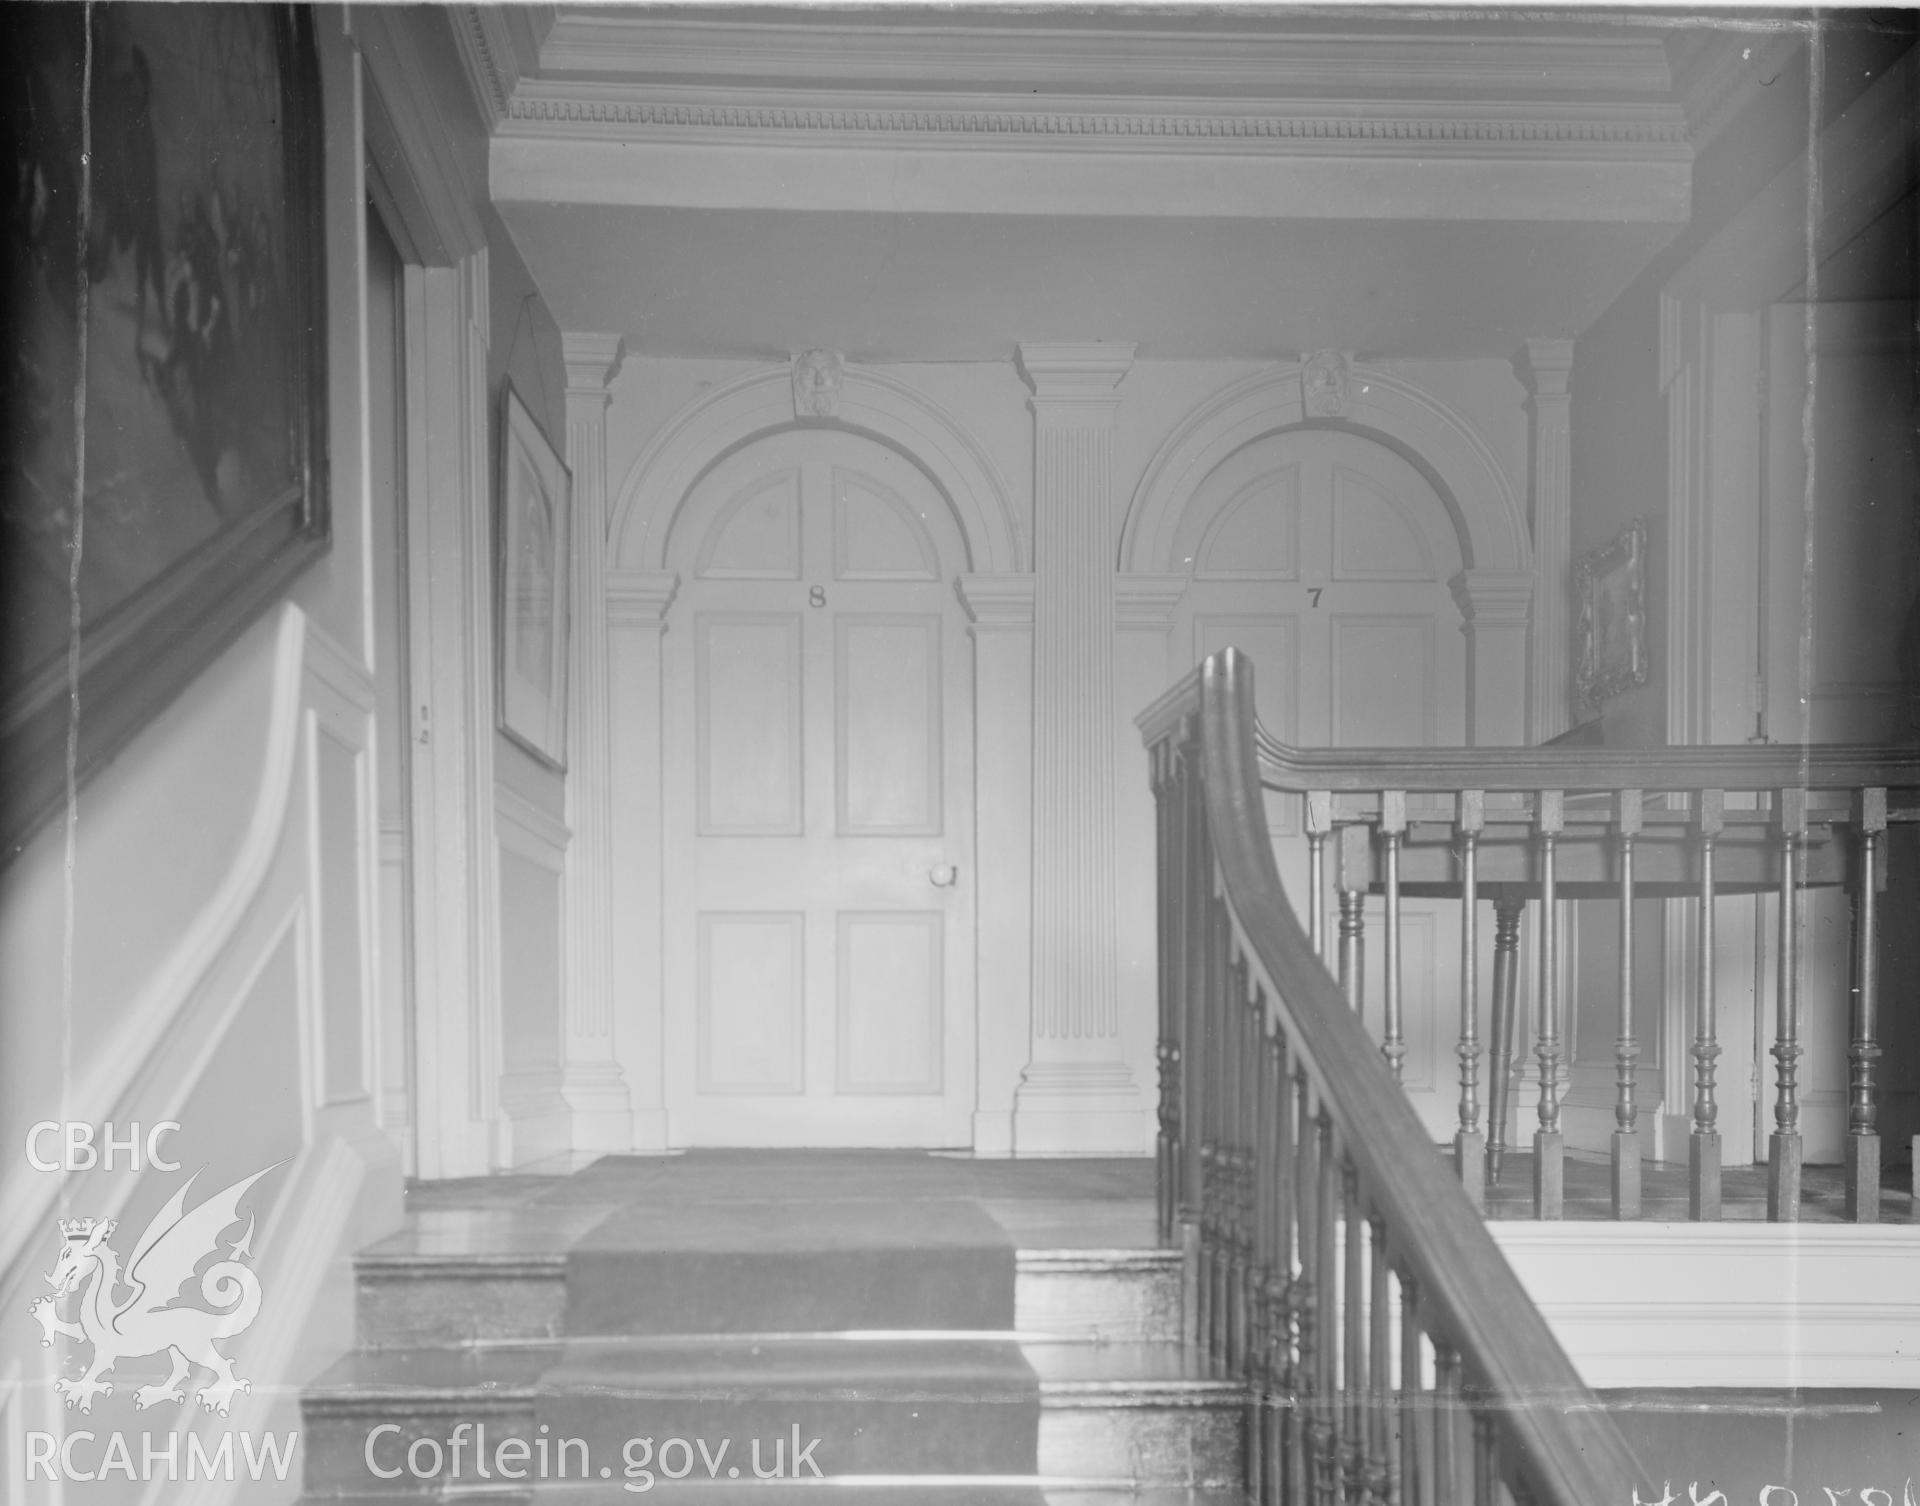 View of staircase and 1st floor doorways